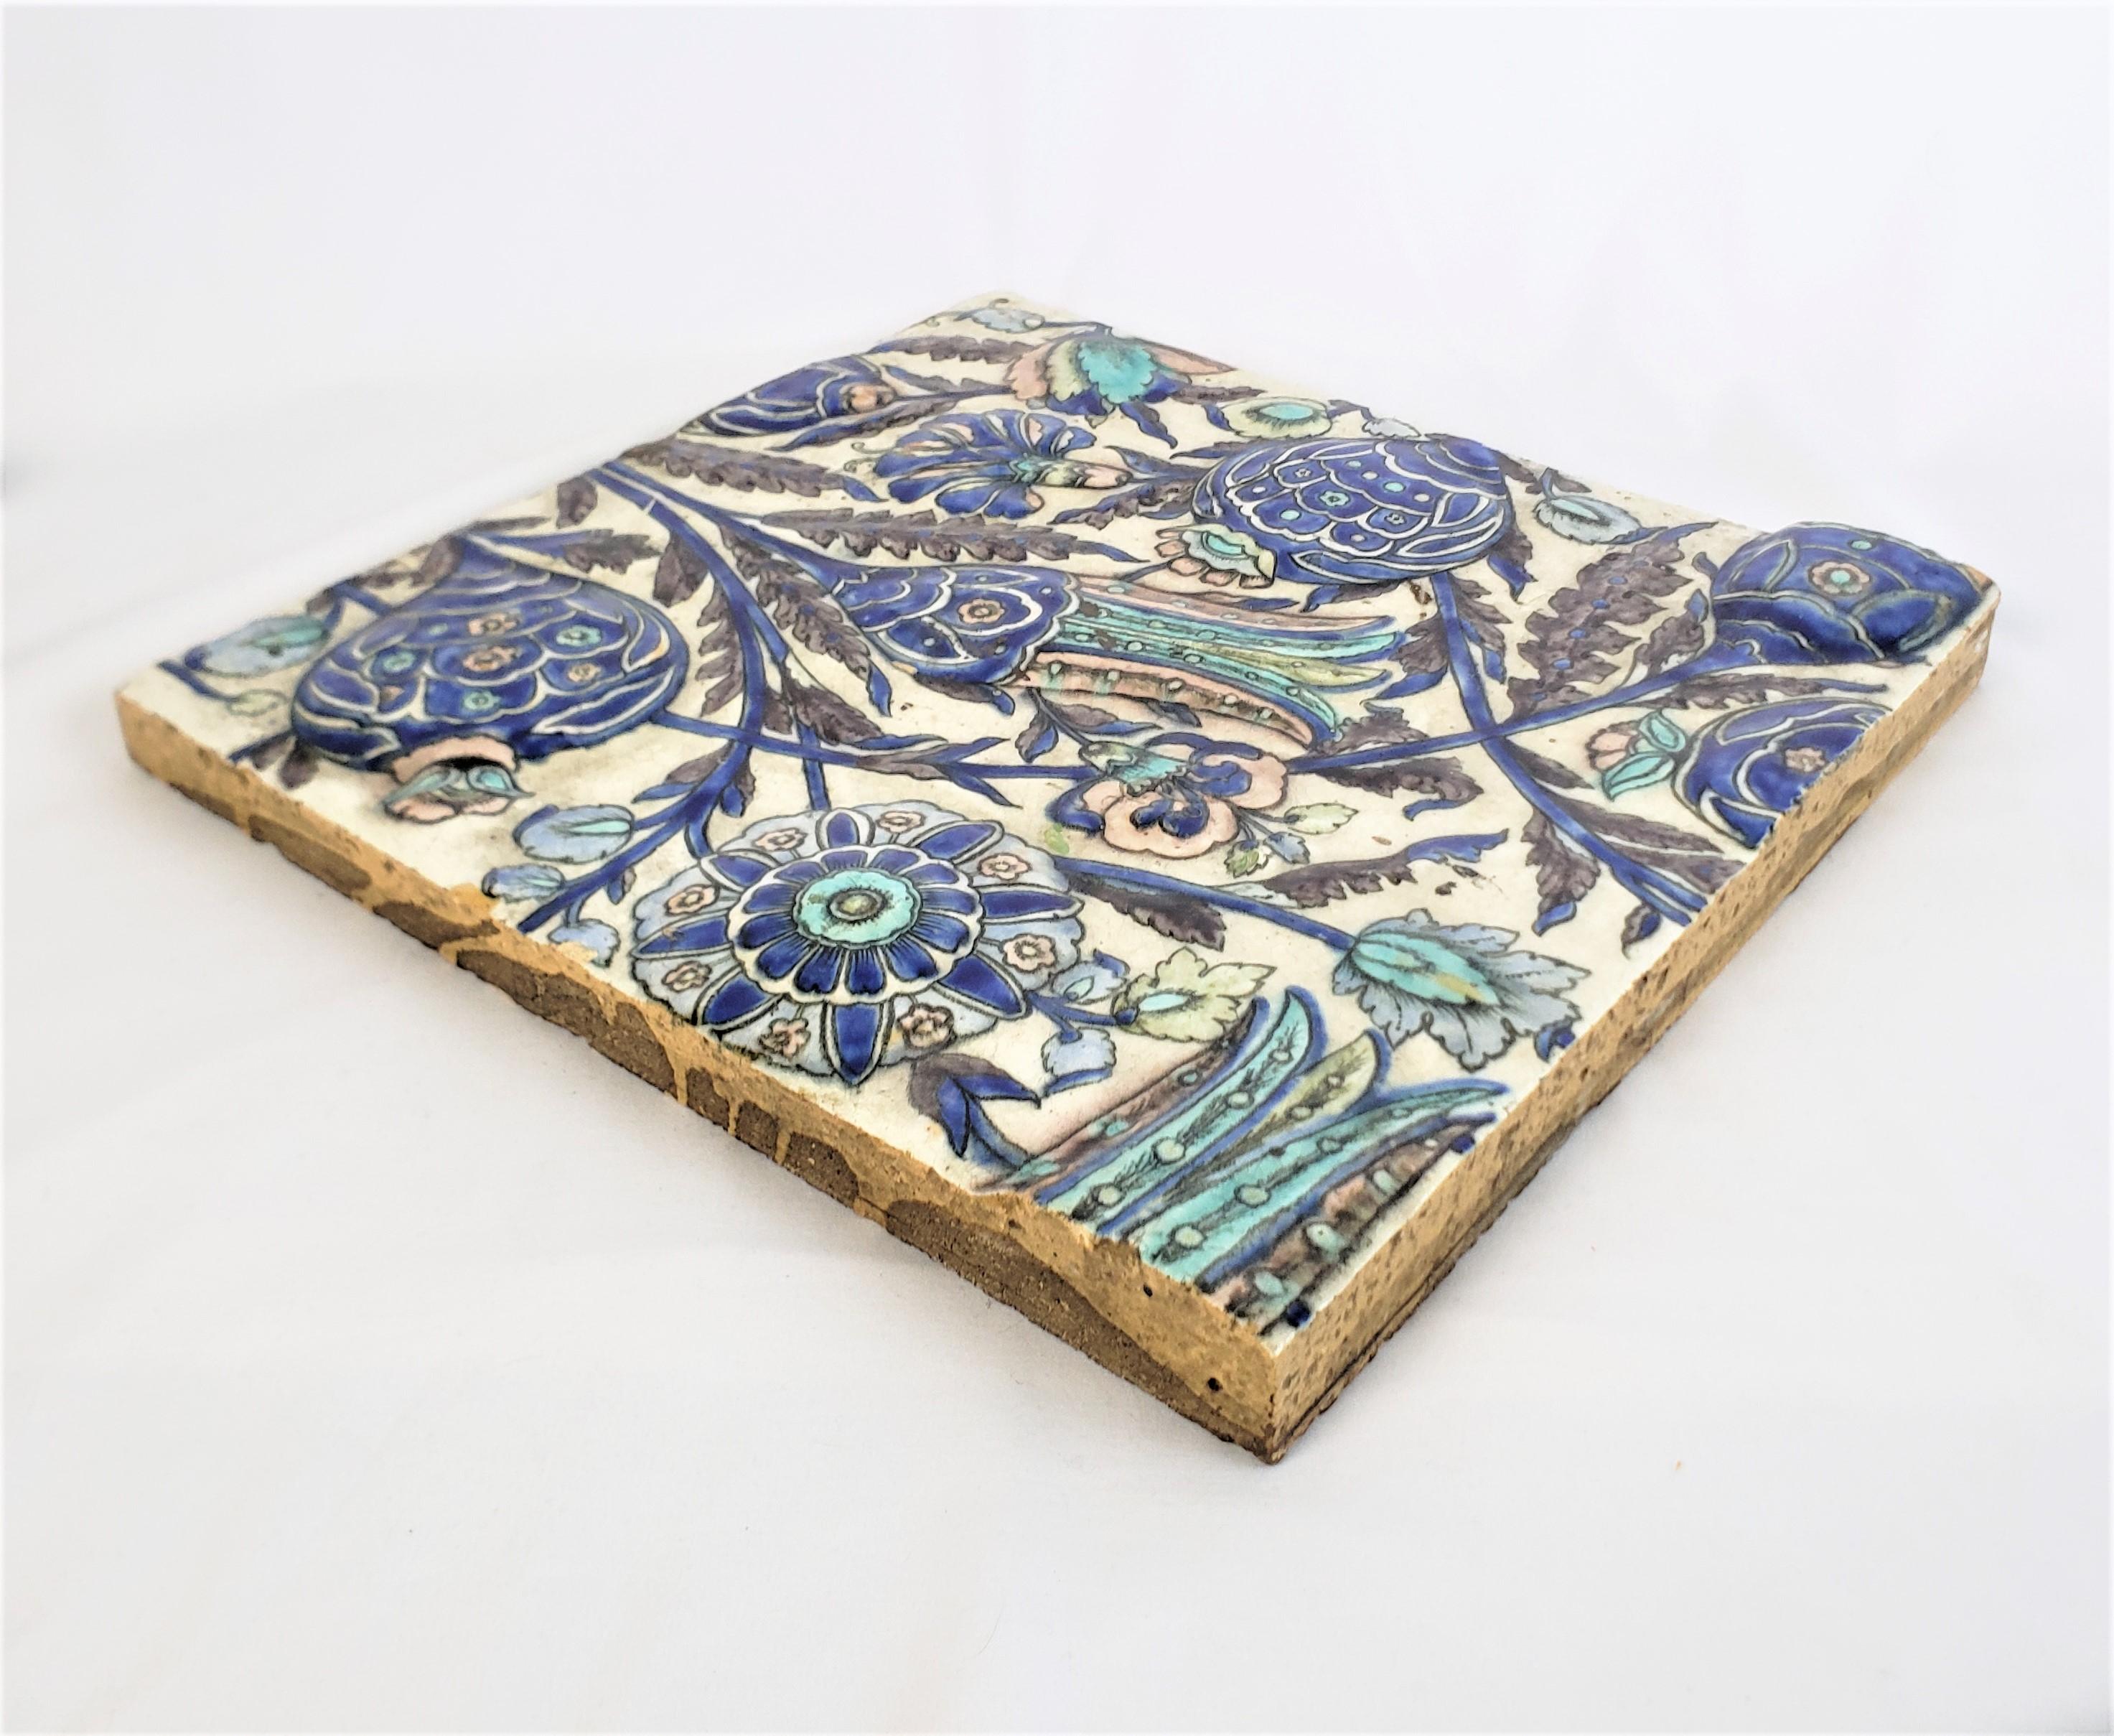 English William Morris Styled Craven, Dunnil & Jackfield Art Pottery Decorative Tile For Sale